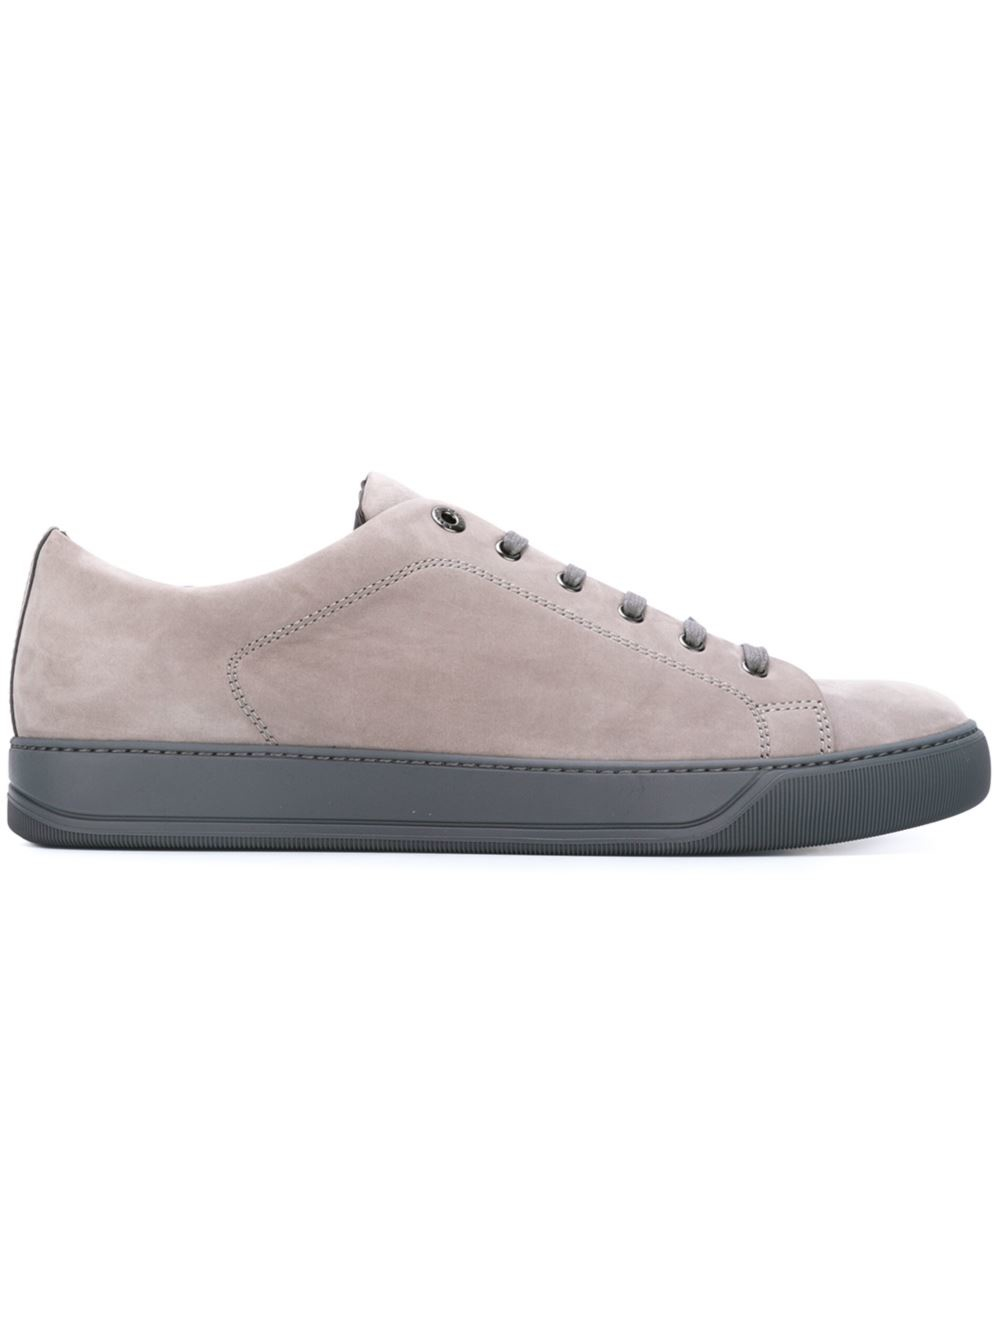 Lanvin Classic Lace-up Sneakers in Gray for Men | Lyst